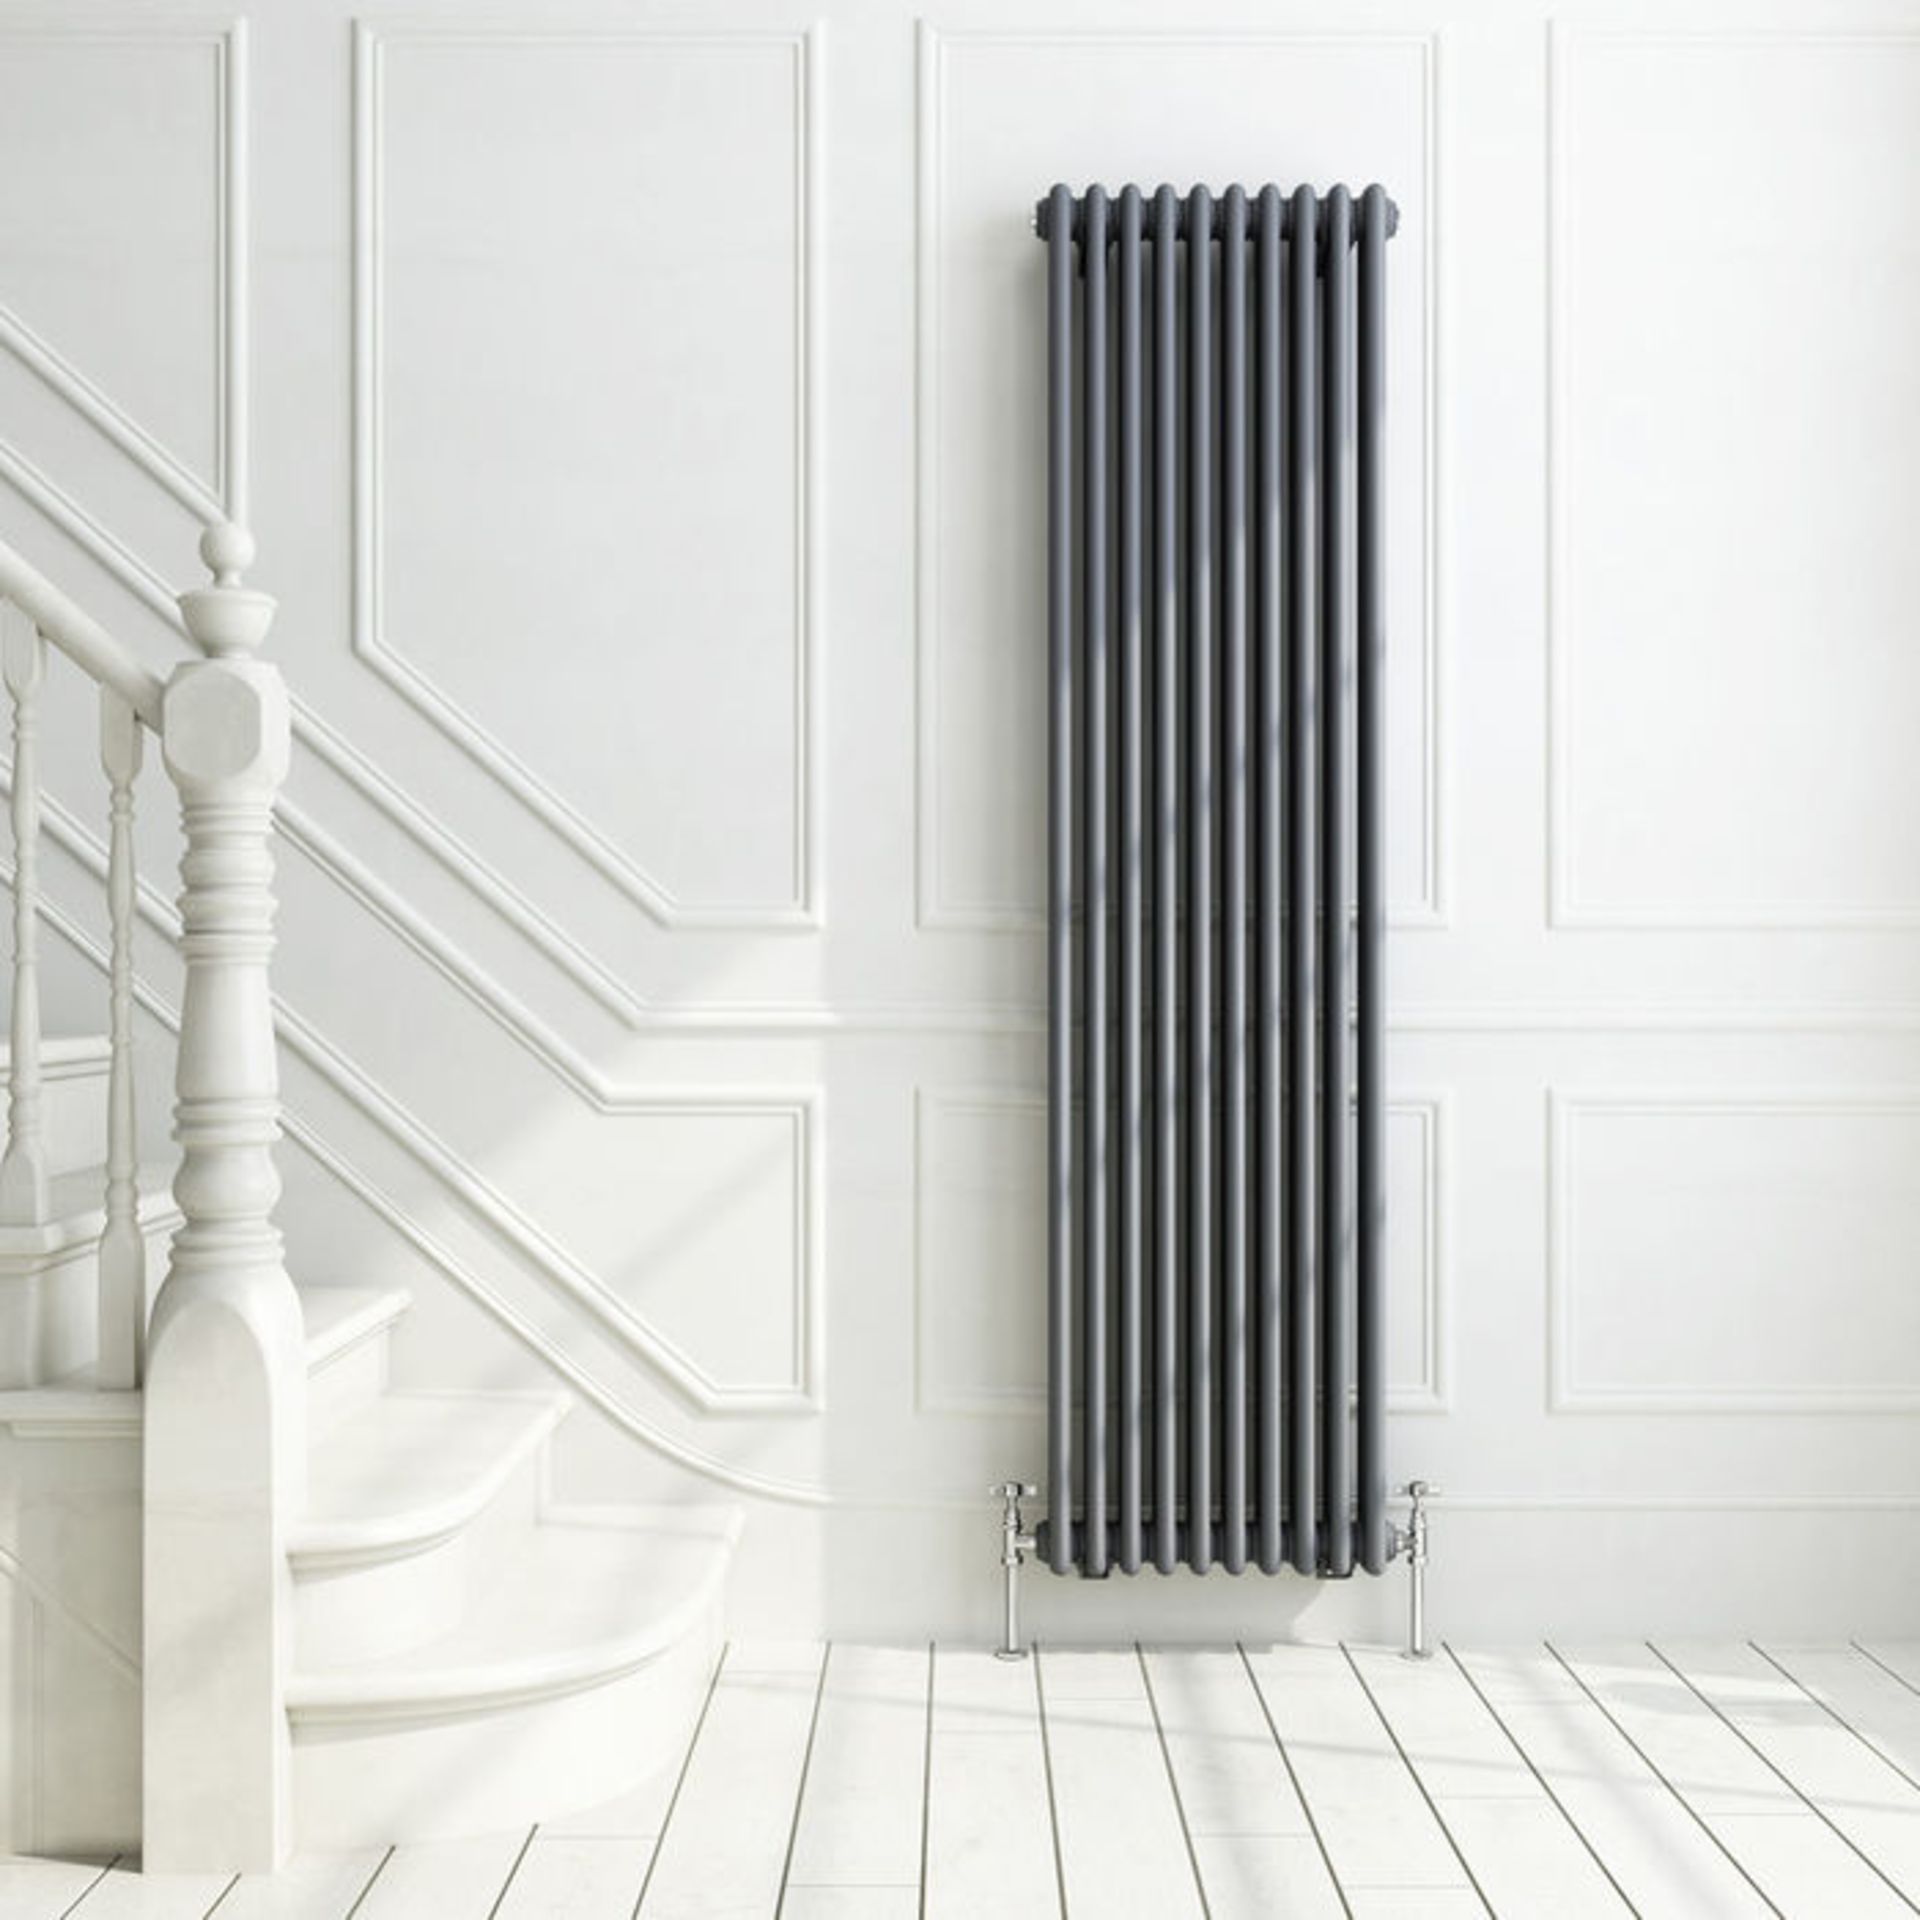 (SA24) 1800x468mm Anthracite Triple Panel Vertical Colosseum Traditional Radiator. RRP £554.99. - Image 2 of 4